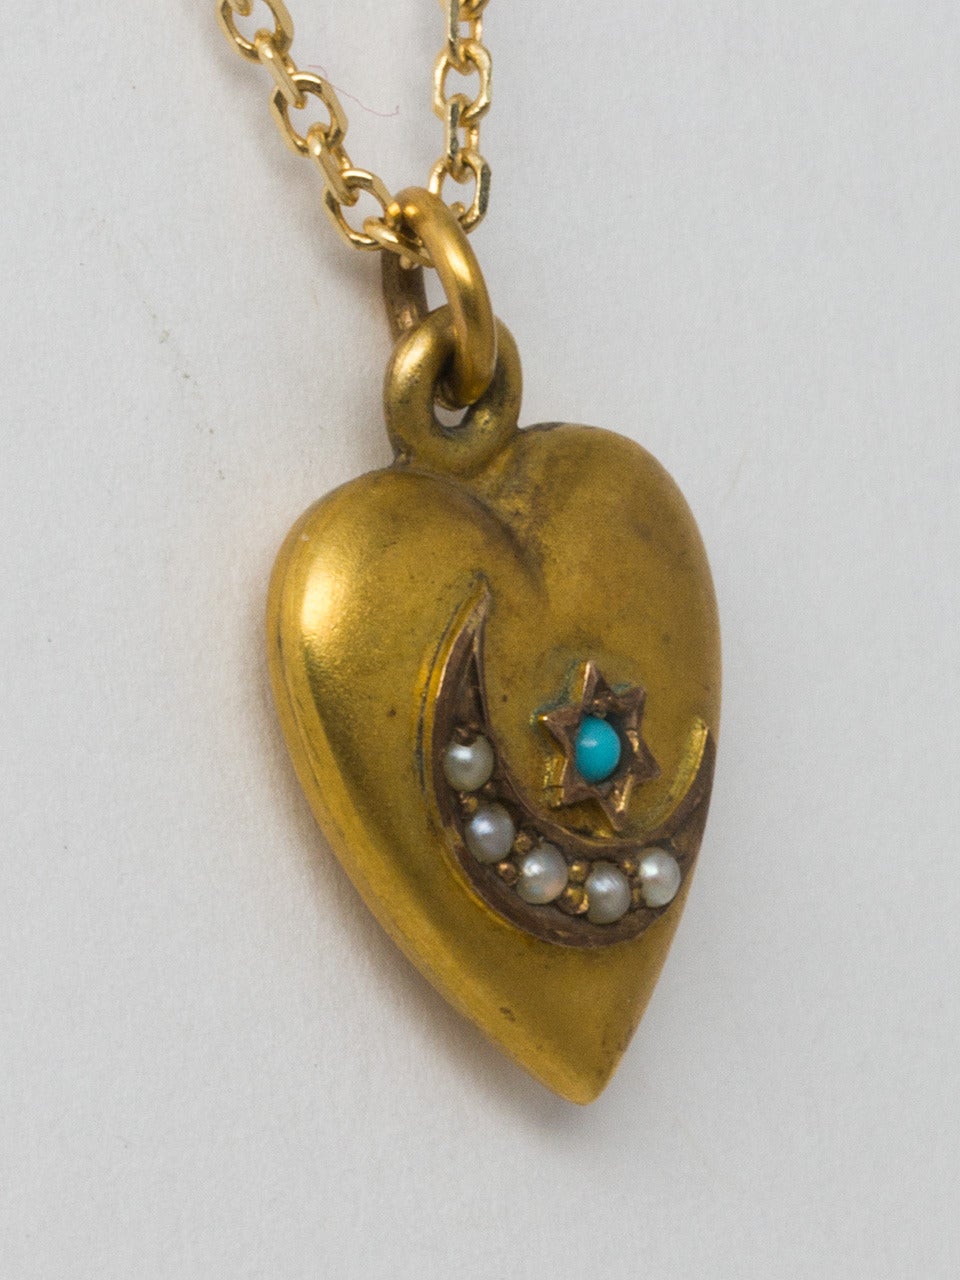 Victorian 14K yellow gold  puffed heart pendant with sweet crescent moon and star design on front. The crescent moon is adorned with small pearls while the six pointed has a turquoise. Hand engraved 